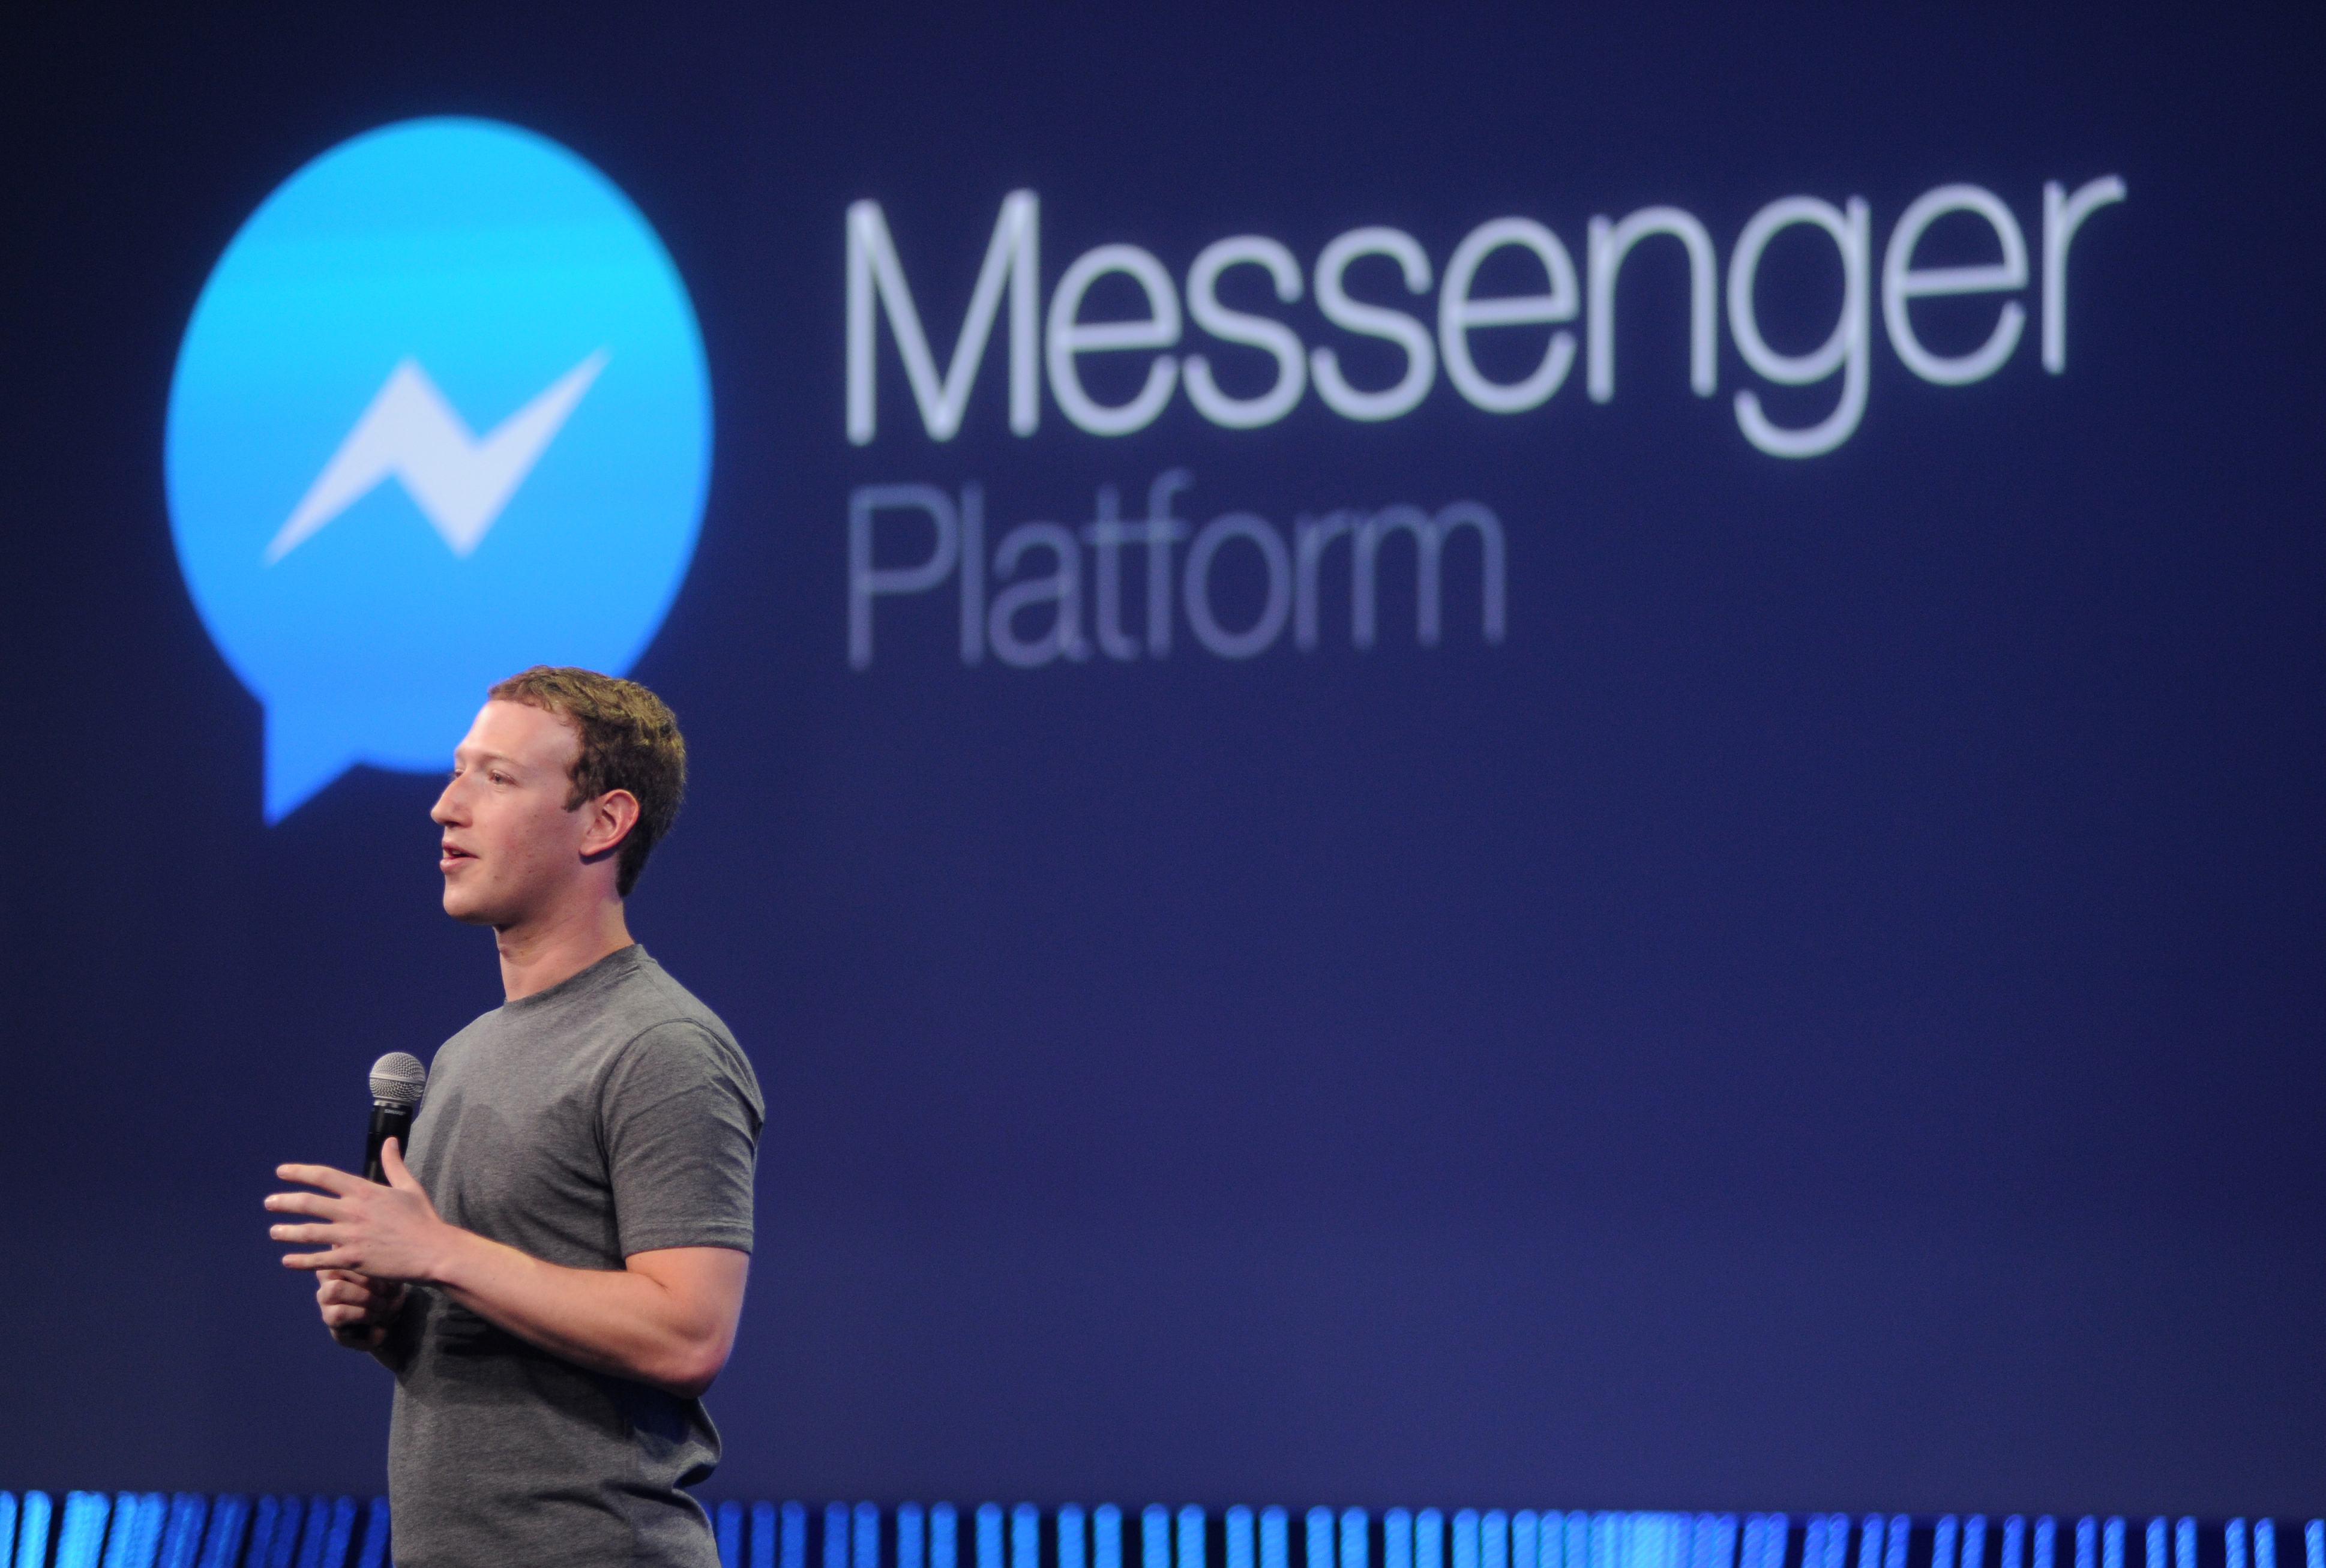 Facebook CEO Mark Zuckerberg introduces a new messenger platform at the F8 summit in San Francisco, California, on March 25, 2015. AFP PHOTO/JOSH EDELSON / AFP PHOTO / Josh Edelson